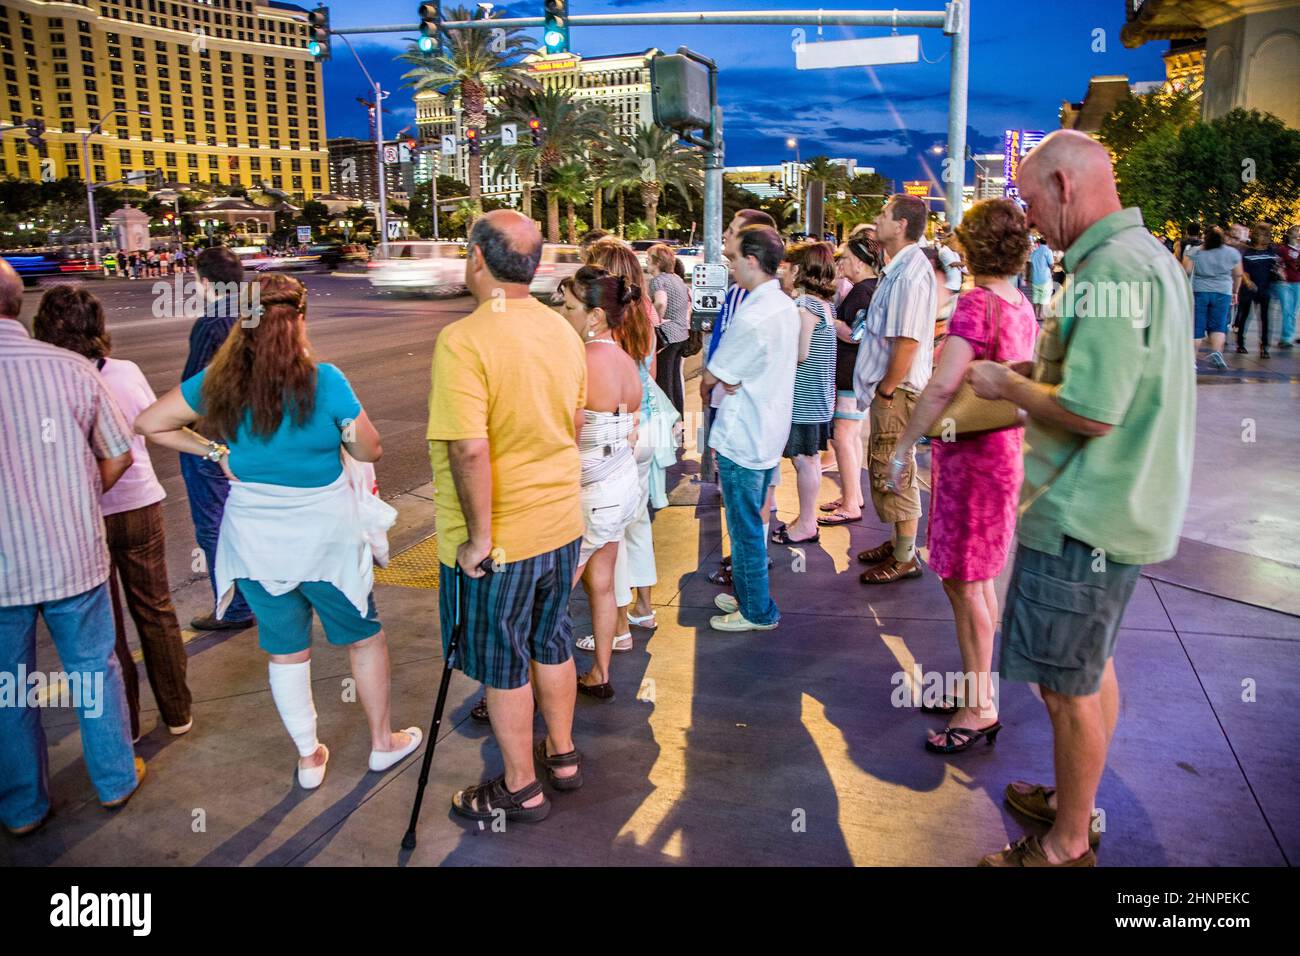 pedestrians wait at the Strip in Las Vegas for green light to cross the street. Stock Photo